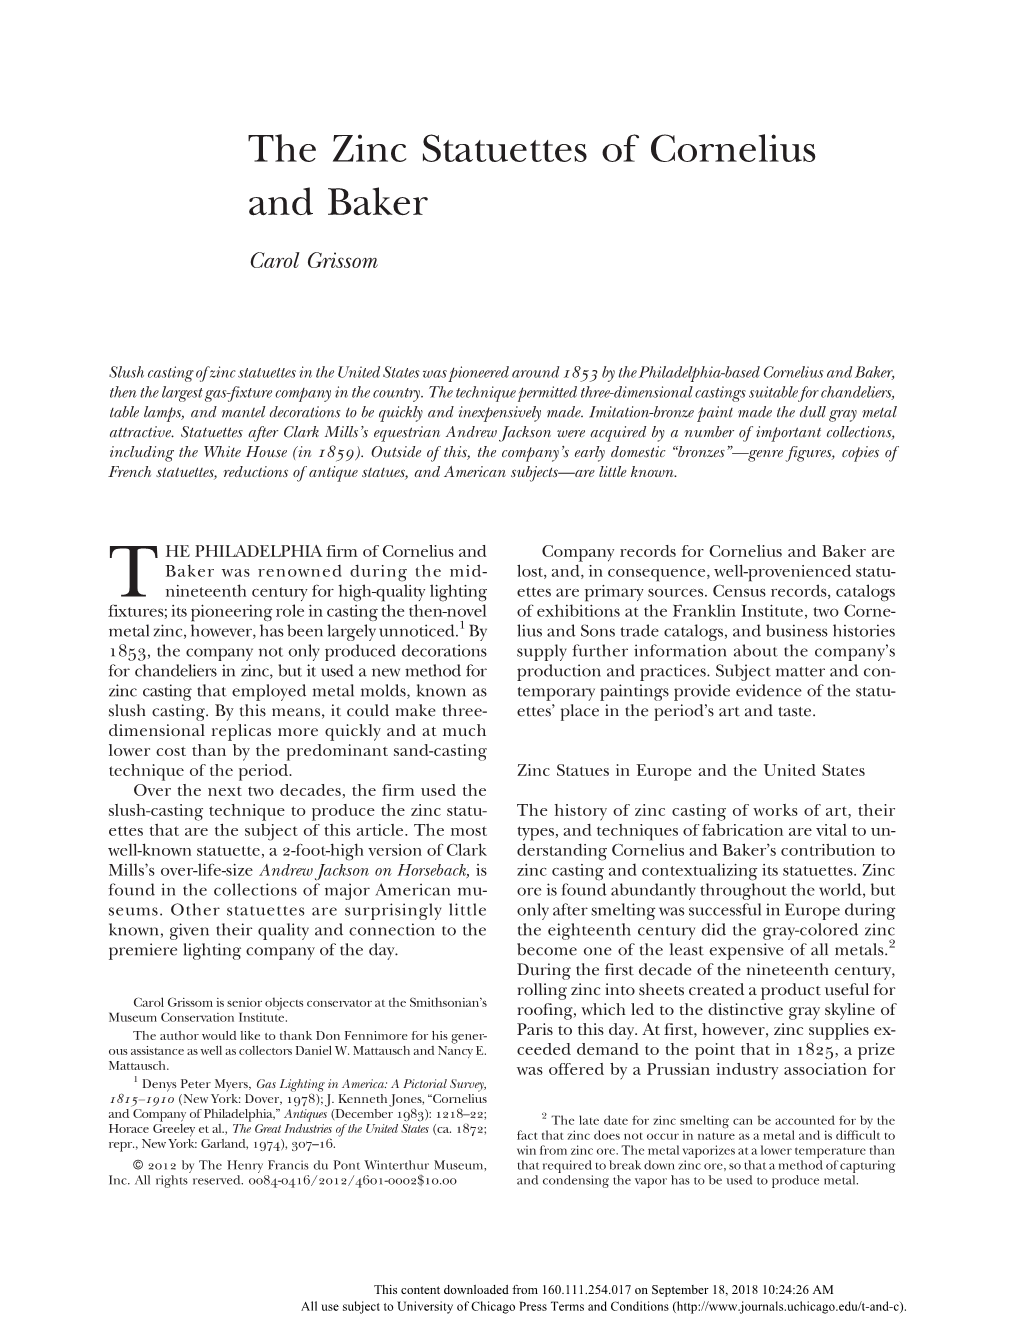 The Zinc Statuettes of Cornelius and Baker